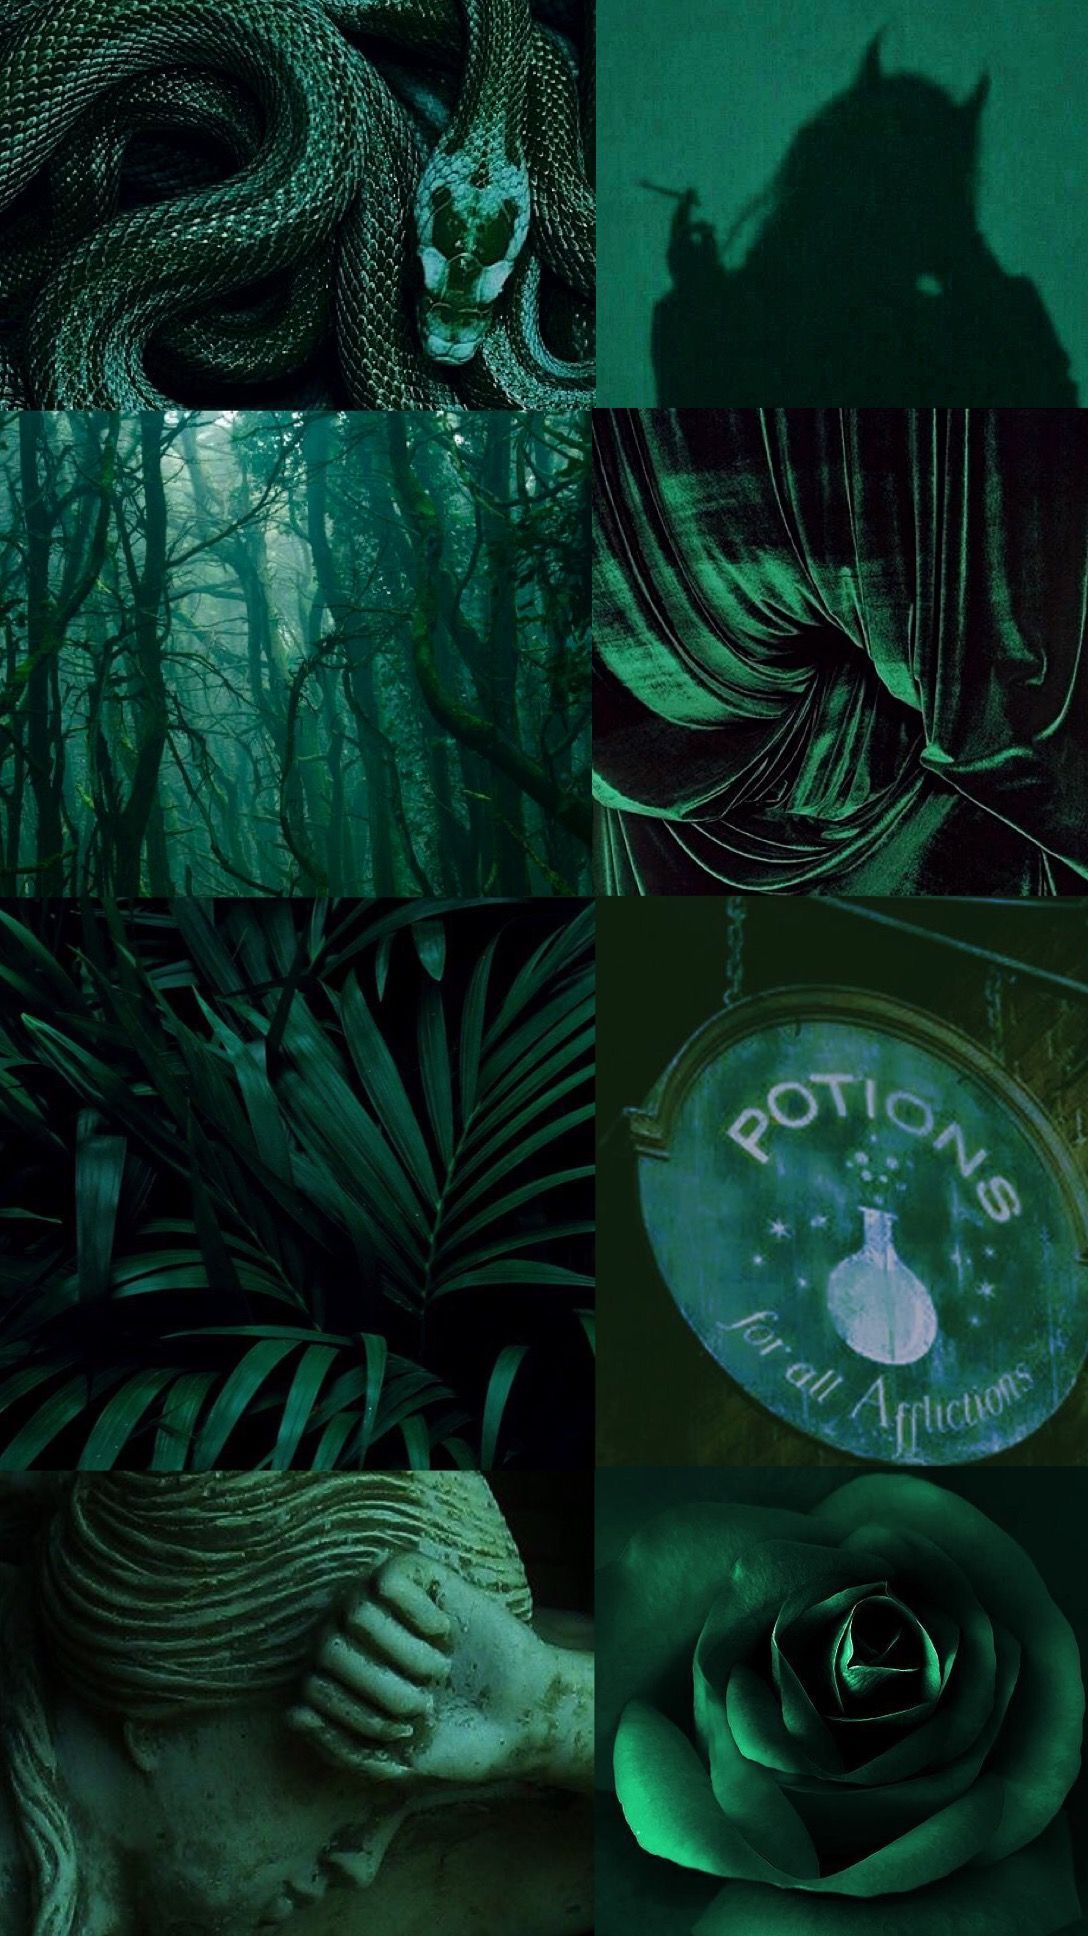 Aesthetic for the green forest of Rhyacia - Turquoise, dark green, Scorpio, green, cyan, lime green, neon green